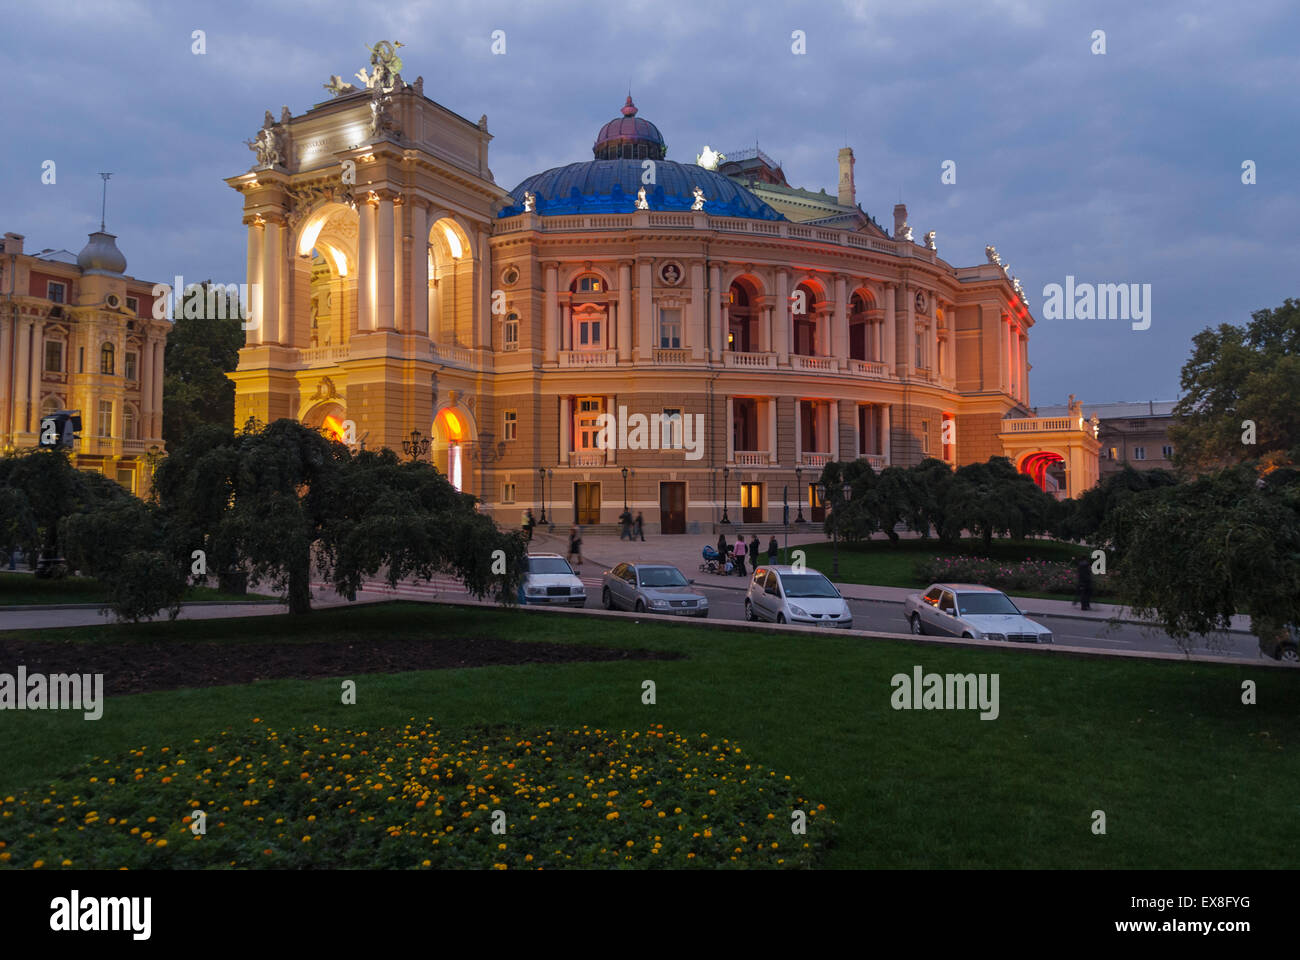 The Odessa Opera House in the Evening lit with different colored lighting Stock Photo